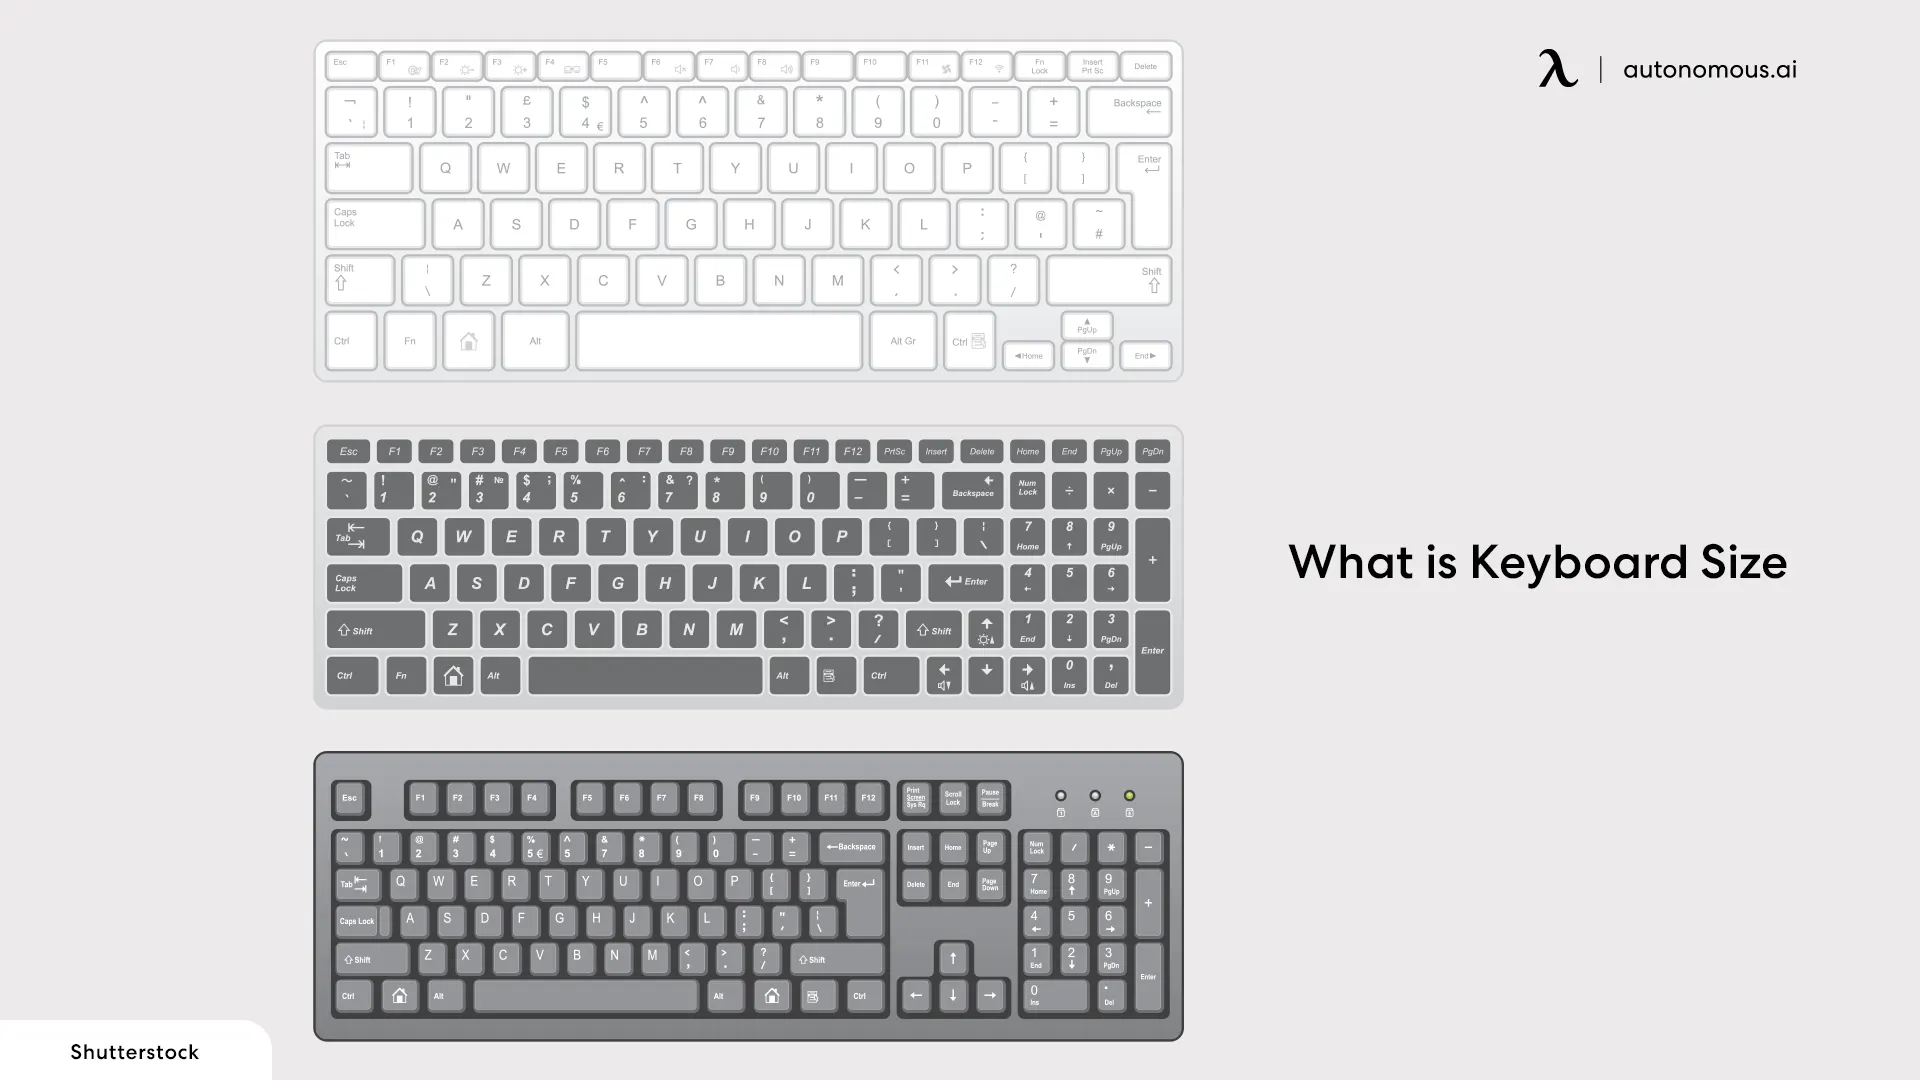 What is Keyboard Size?